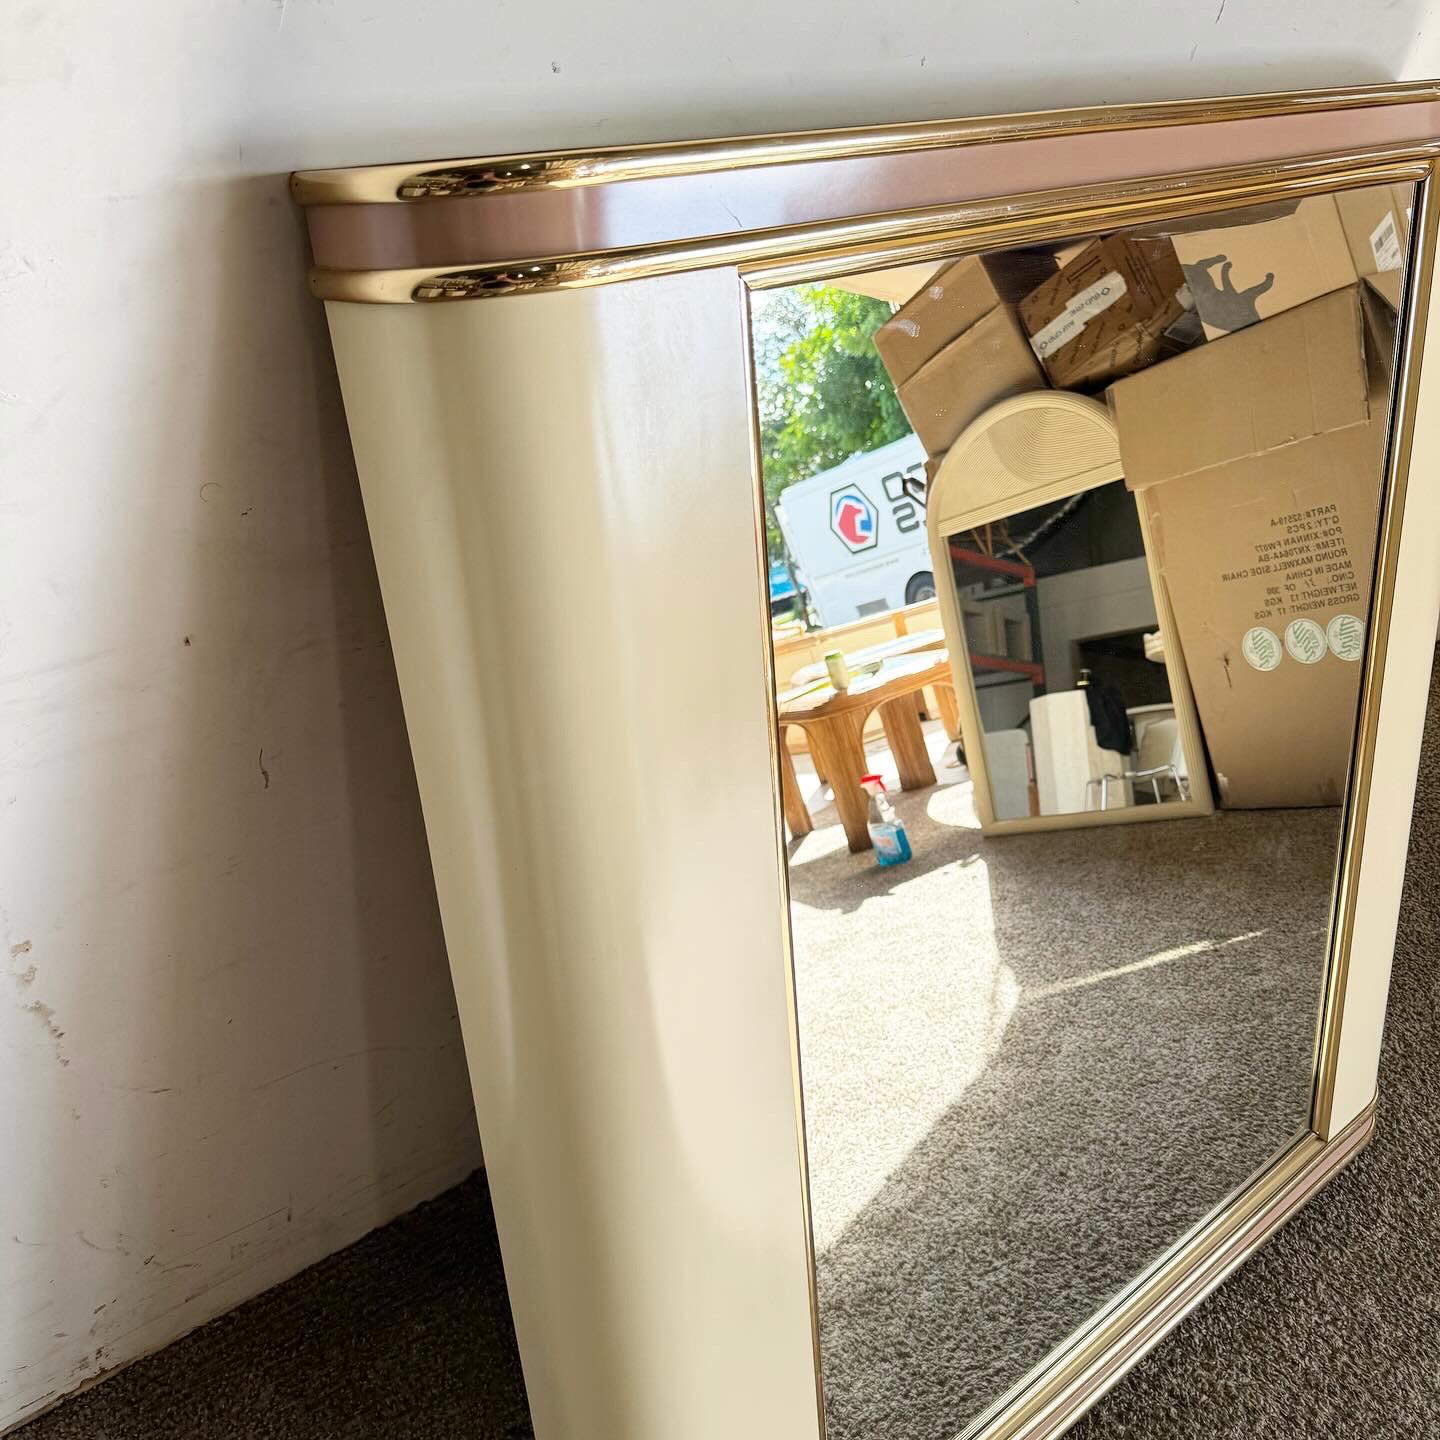 Indulge in the playful sophistication of the Postmodern Pink and Cream Lacquer Laminate Mirror with Gold Trim. This mirror marries soft hues with metallic accents, capturing the exuberant style of the era. It's not just a functional item but a